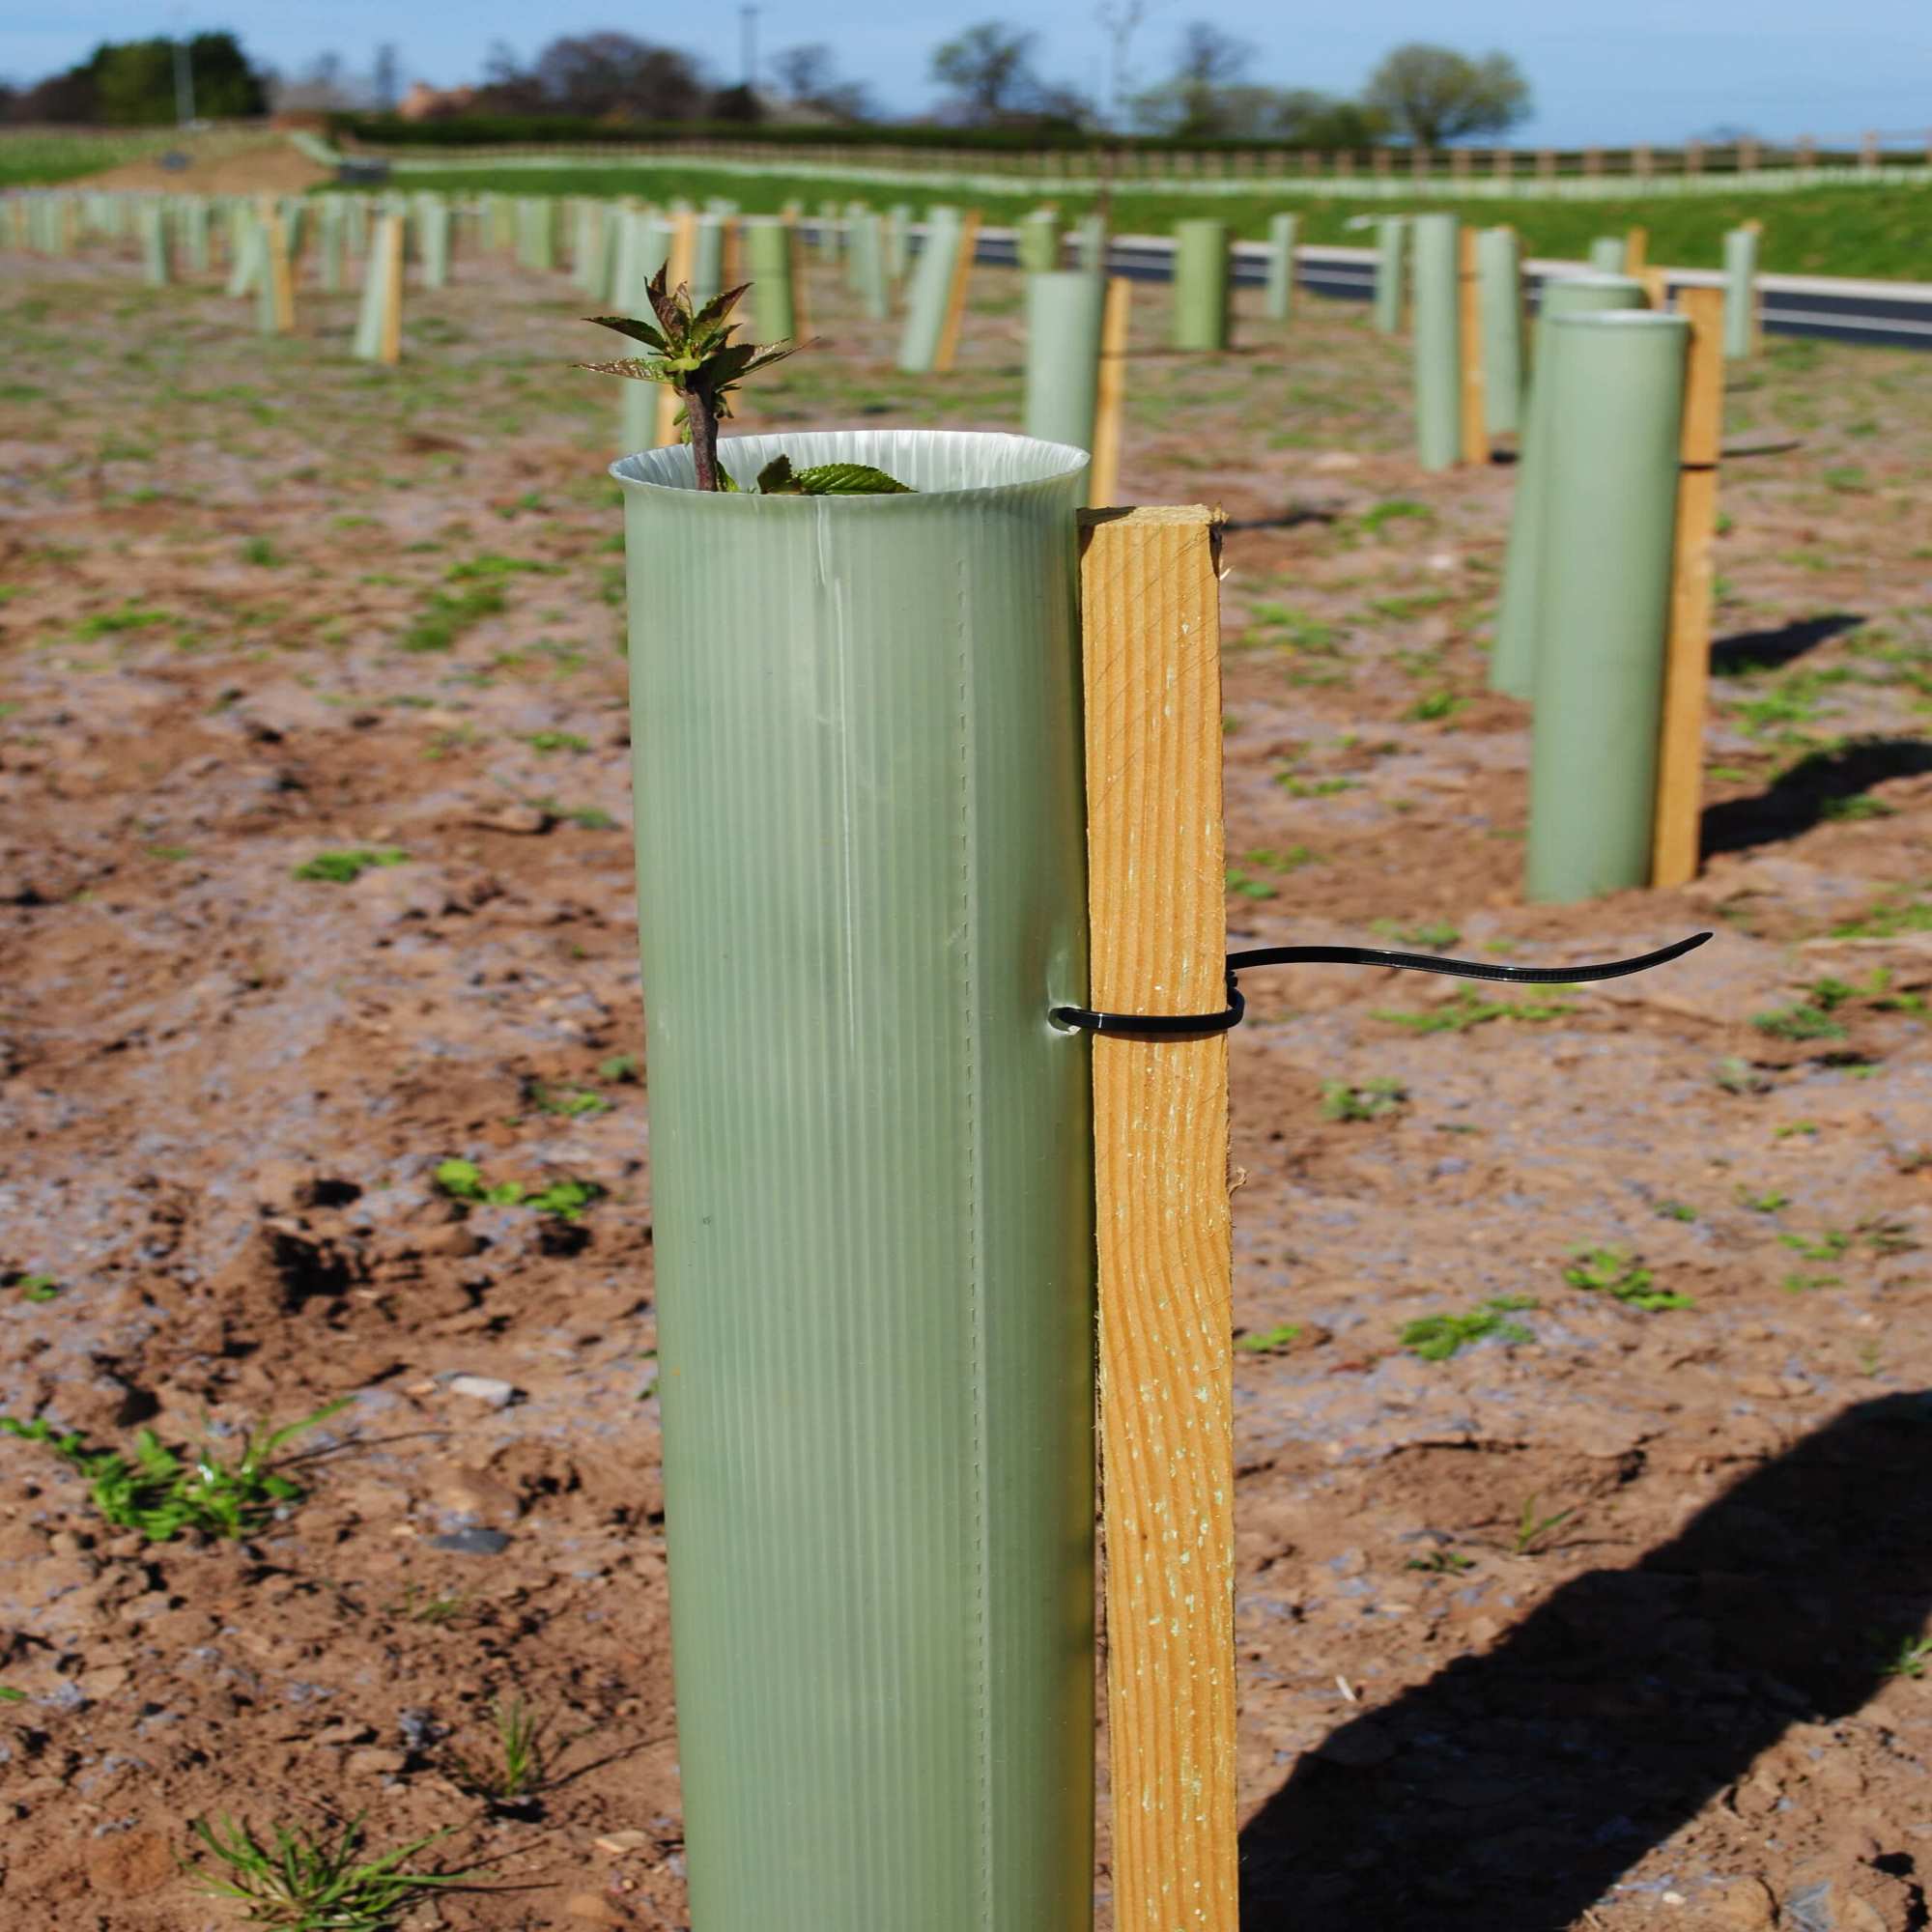 32mm SQUARE & POINTED TANALISED TREE SHELTER STAKES 5 LENGTHS TO CHOOSE FROM 